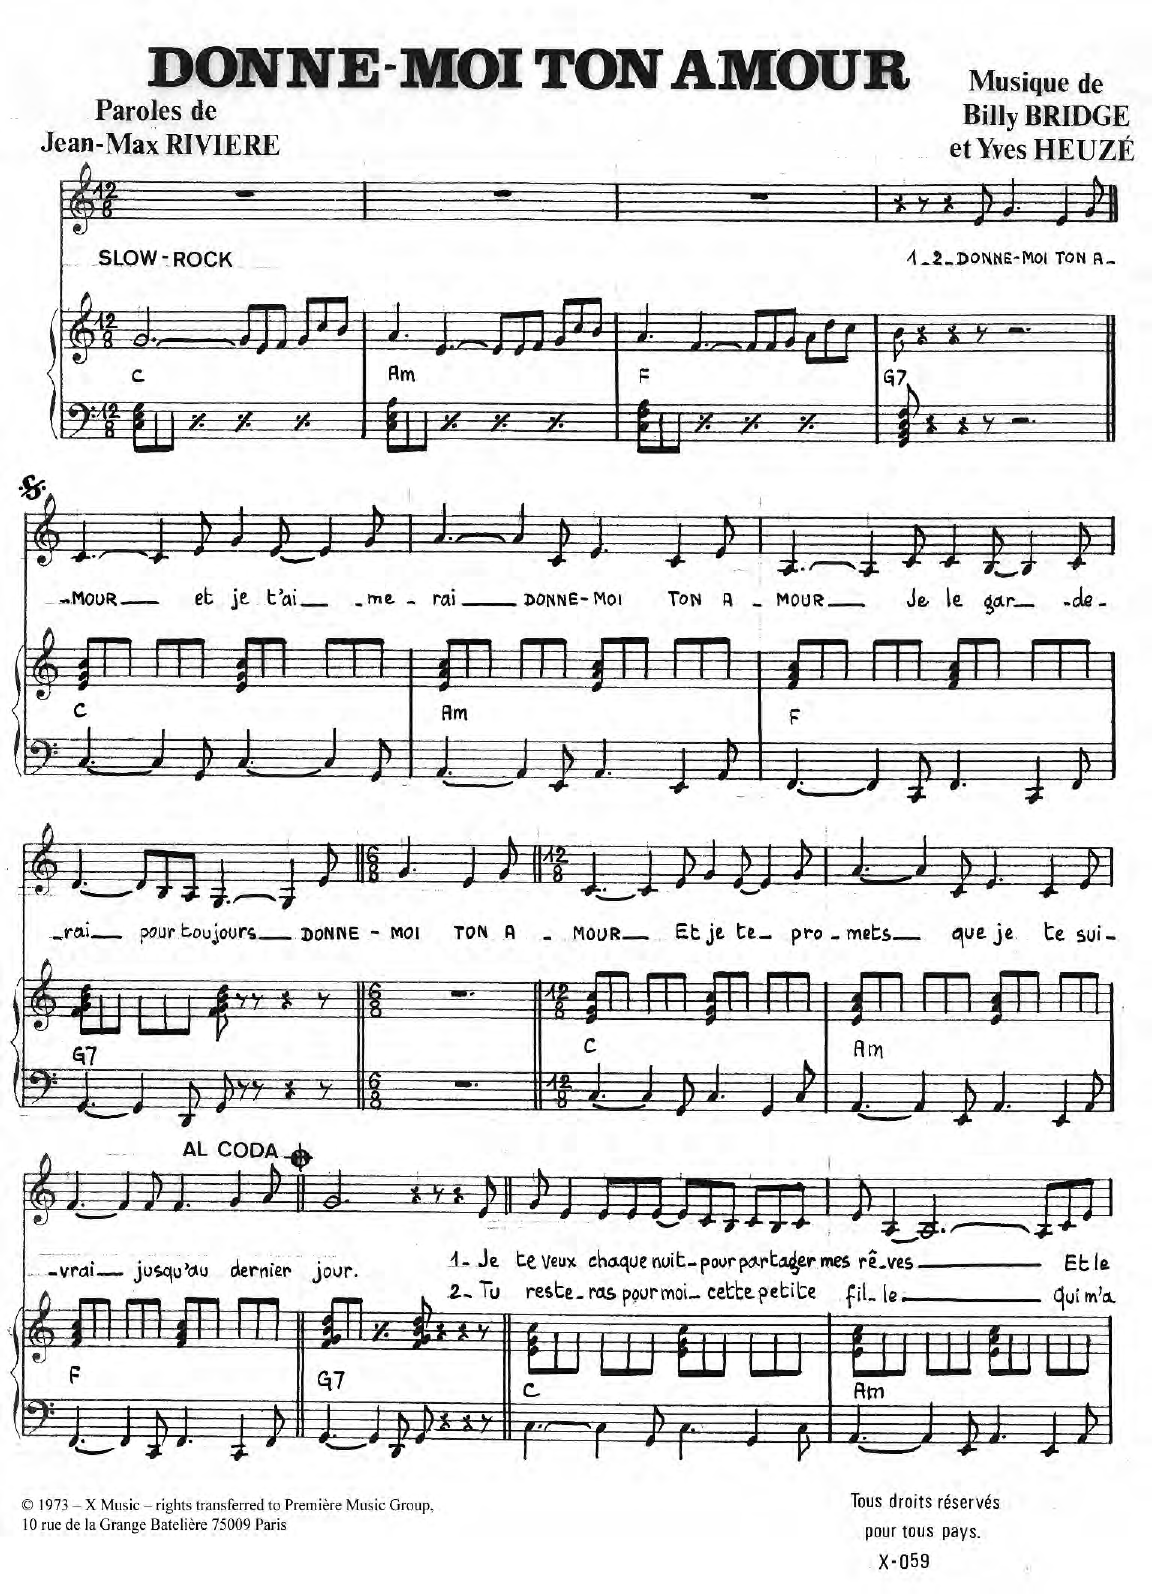 Download Jean-Max Riviere Donne-Moi Ton Amour Sheet Music